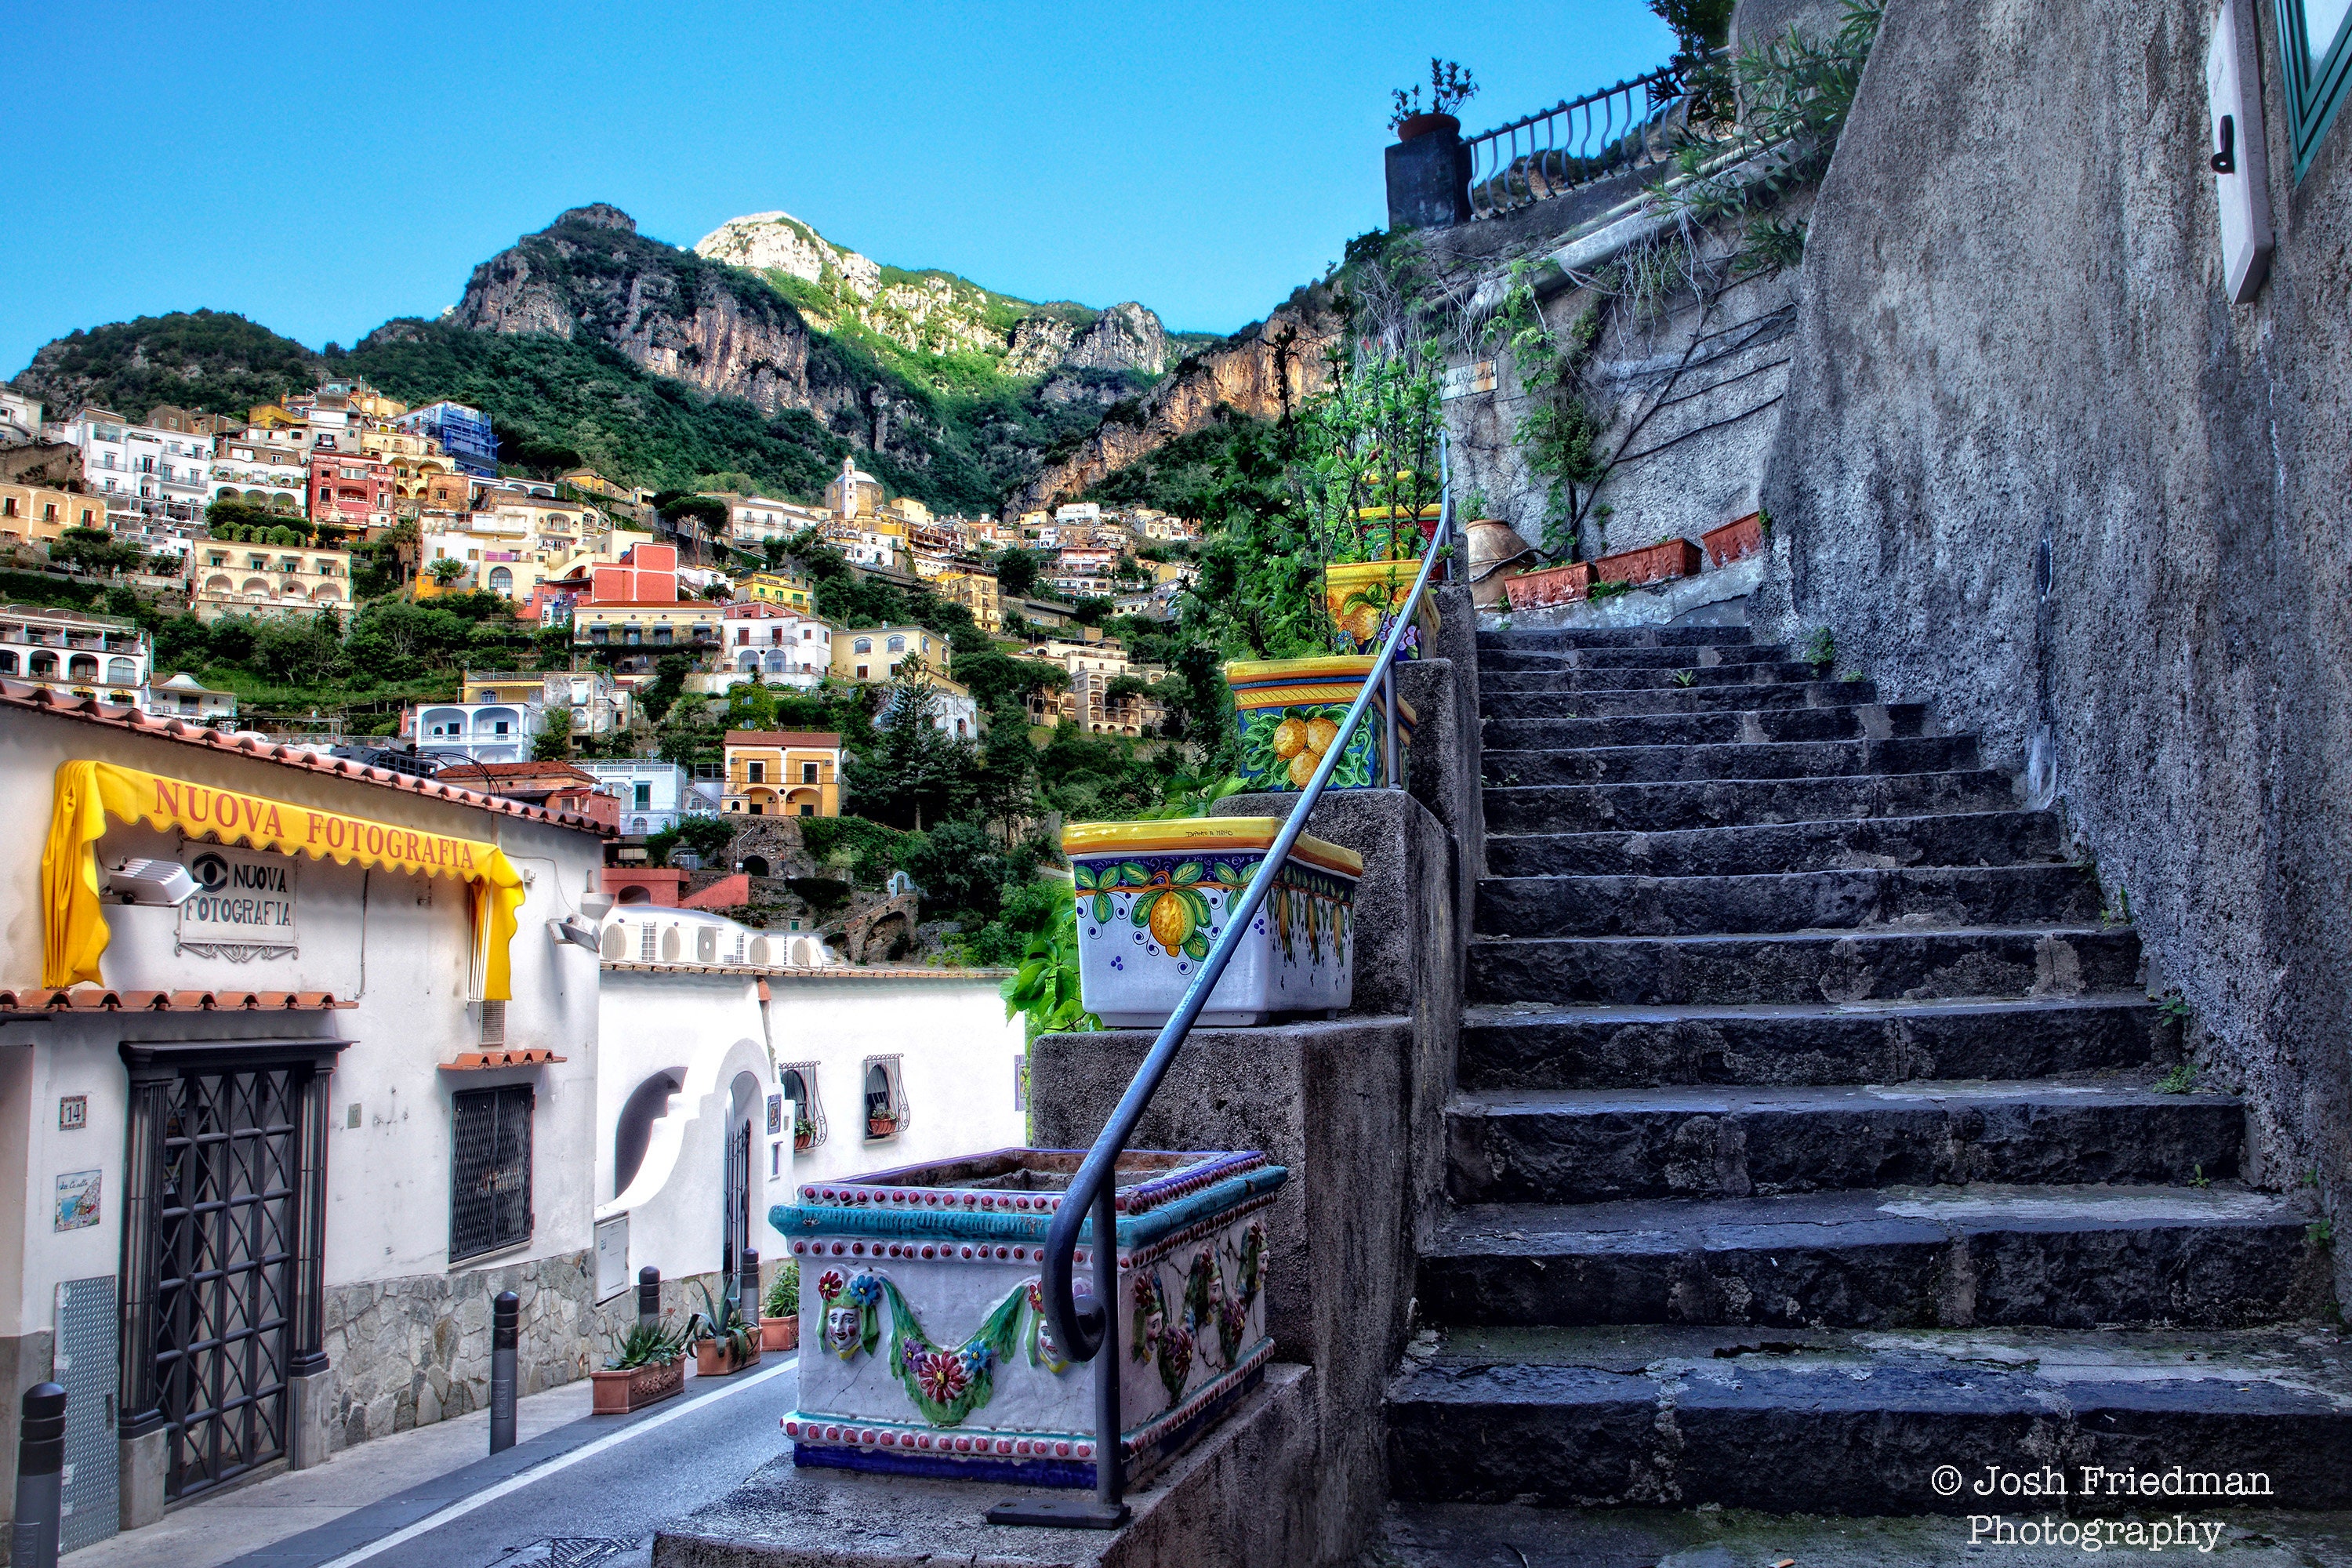 Positano Italy Travel Photograph Stairs Staircase Mountains Cliffs